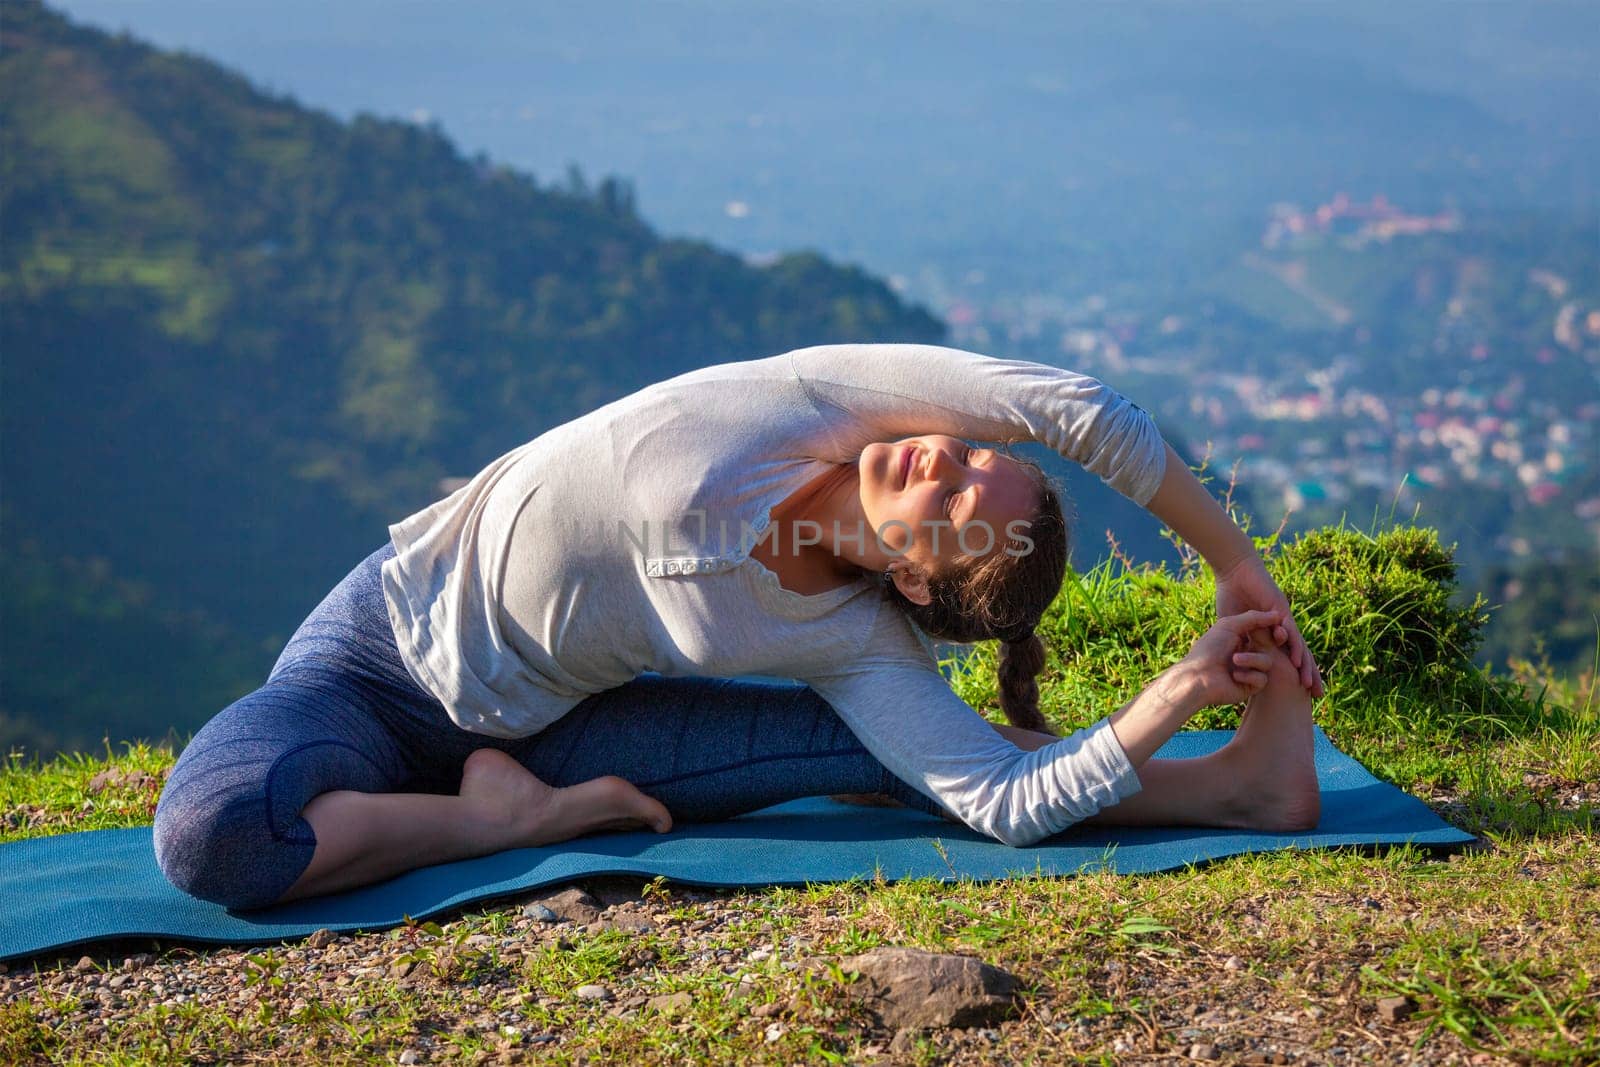 Yoga outdoors - young sporty fit woman doing Hatha Yoga asana parivrtta janu sirsasana - Revolved Head-to-Knee Pose - in mountains in the morning